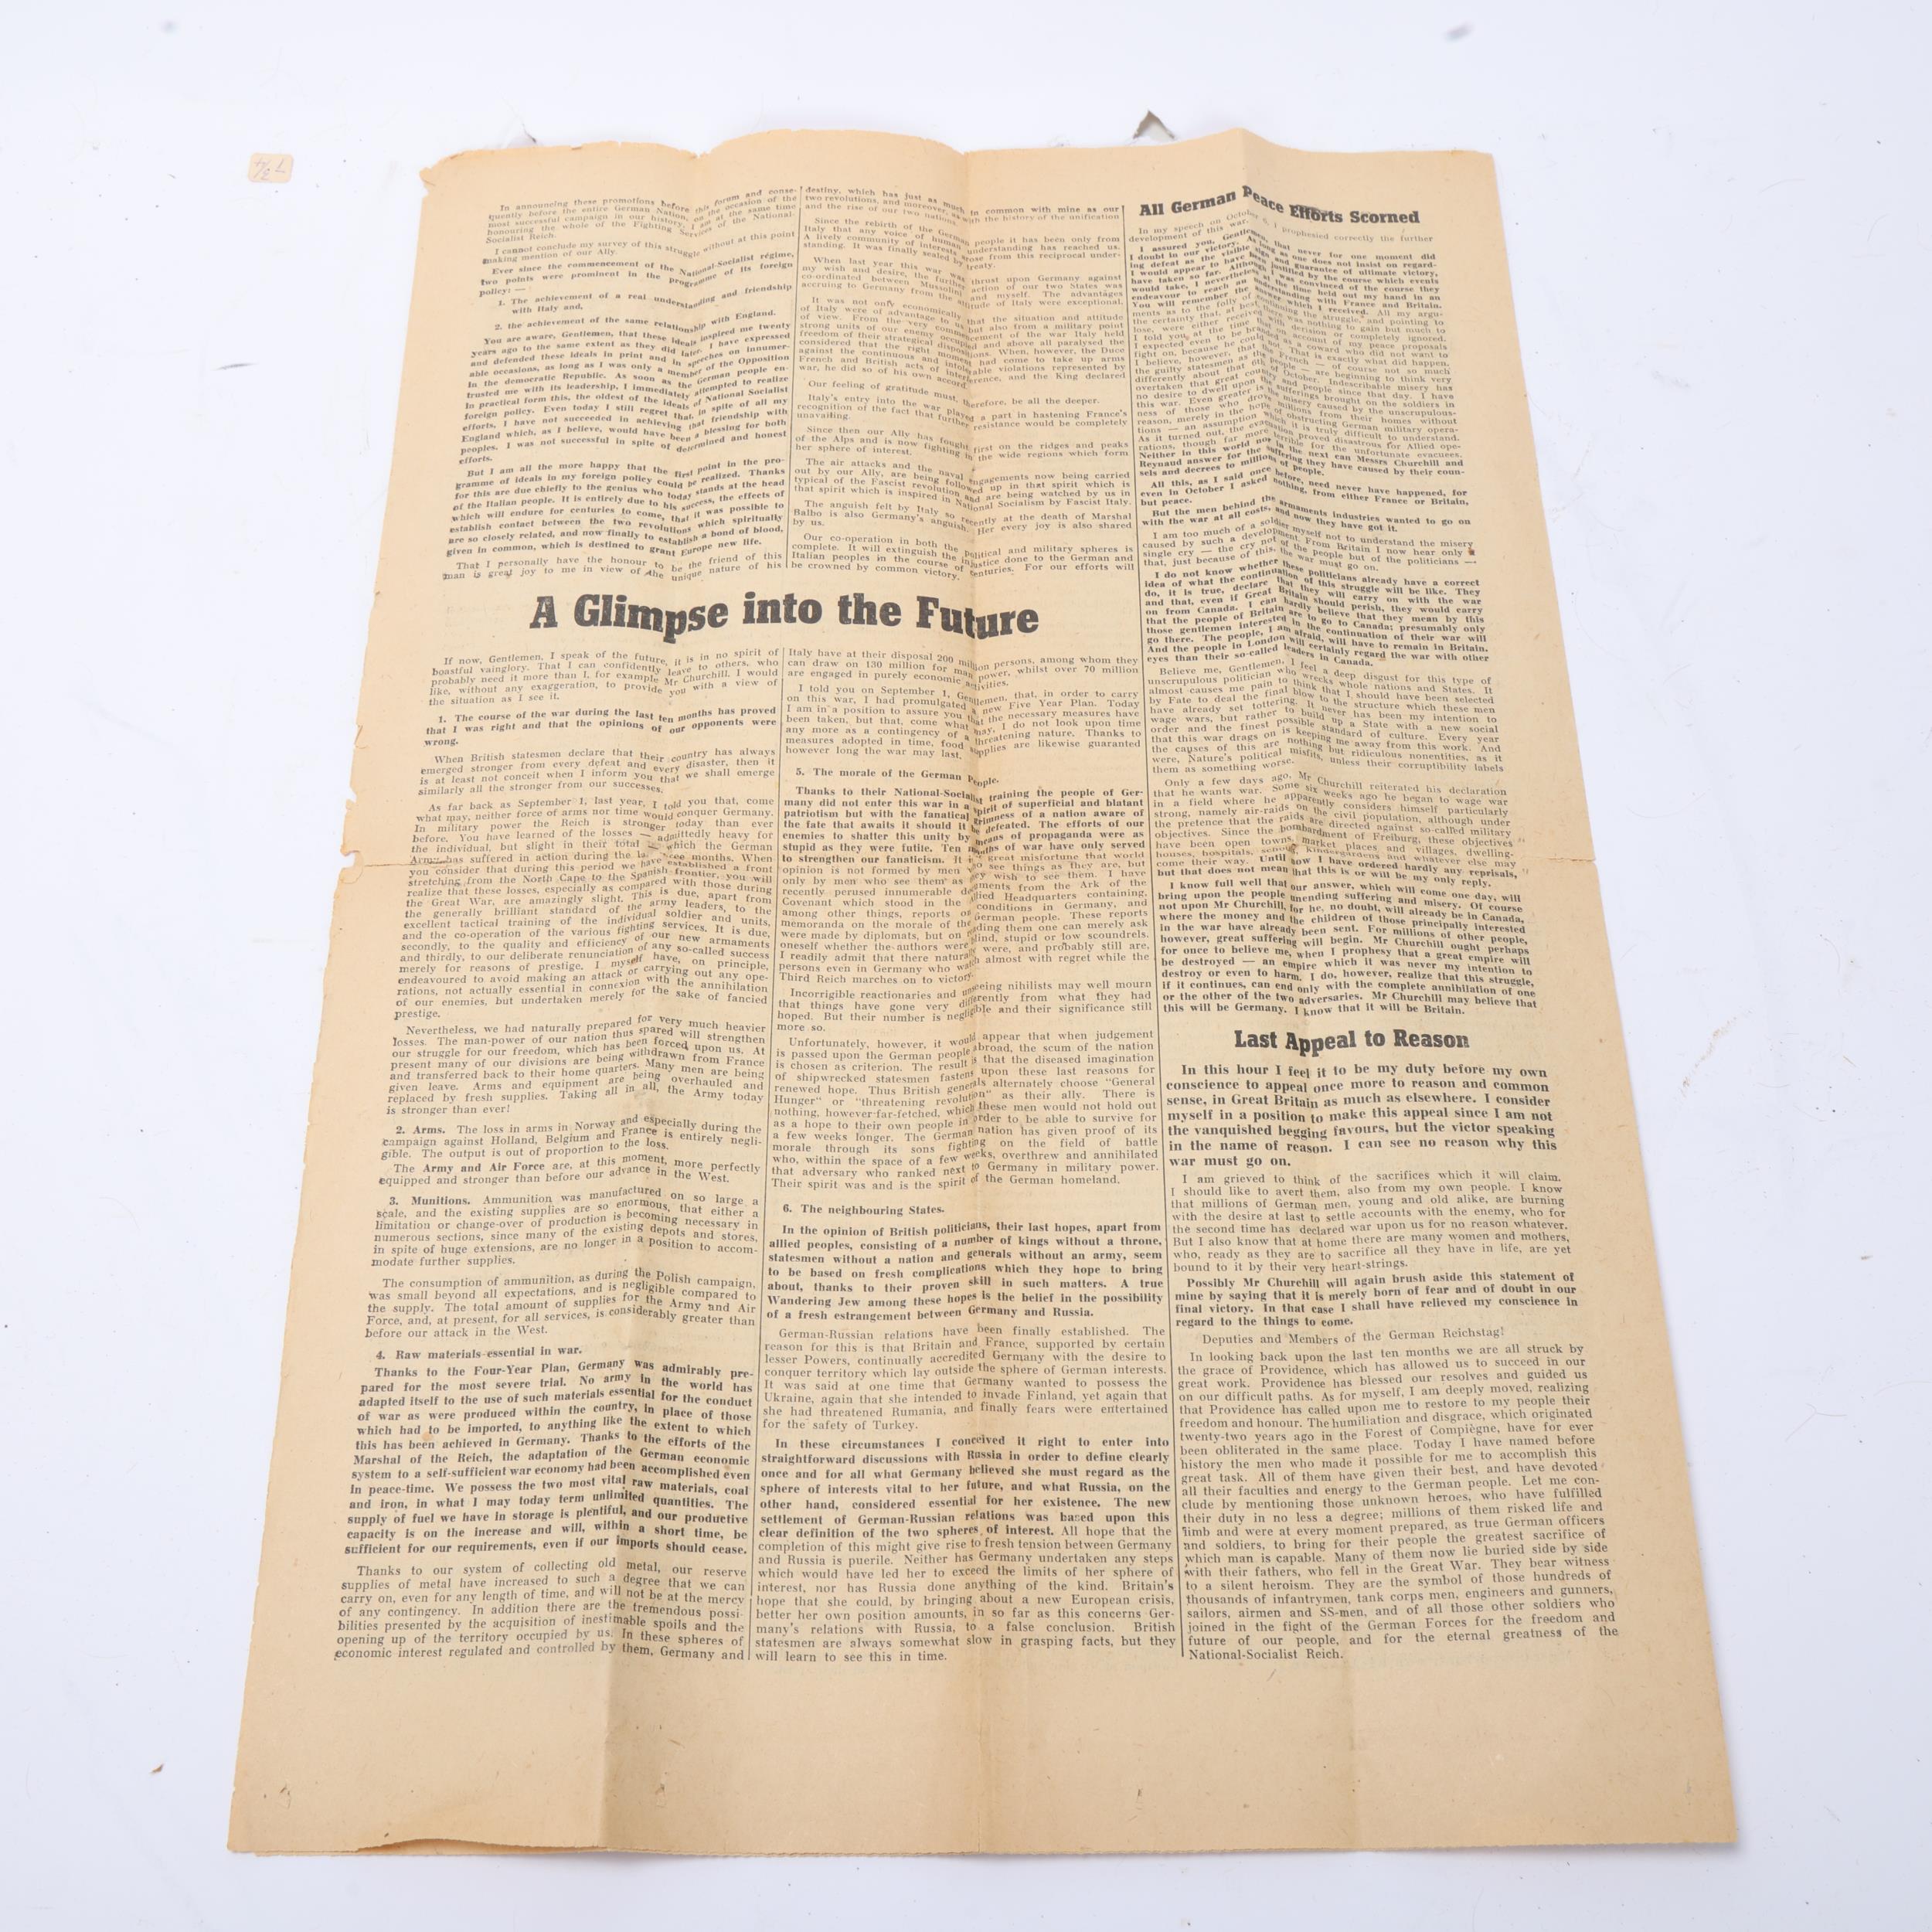 A Last Appeal To Reason by Adolf Hitler, original Second World War Period propaganda paper, - Image 3 of 3